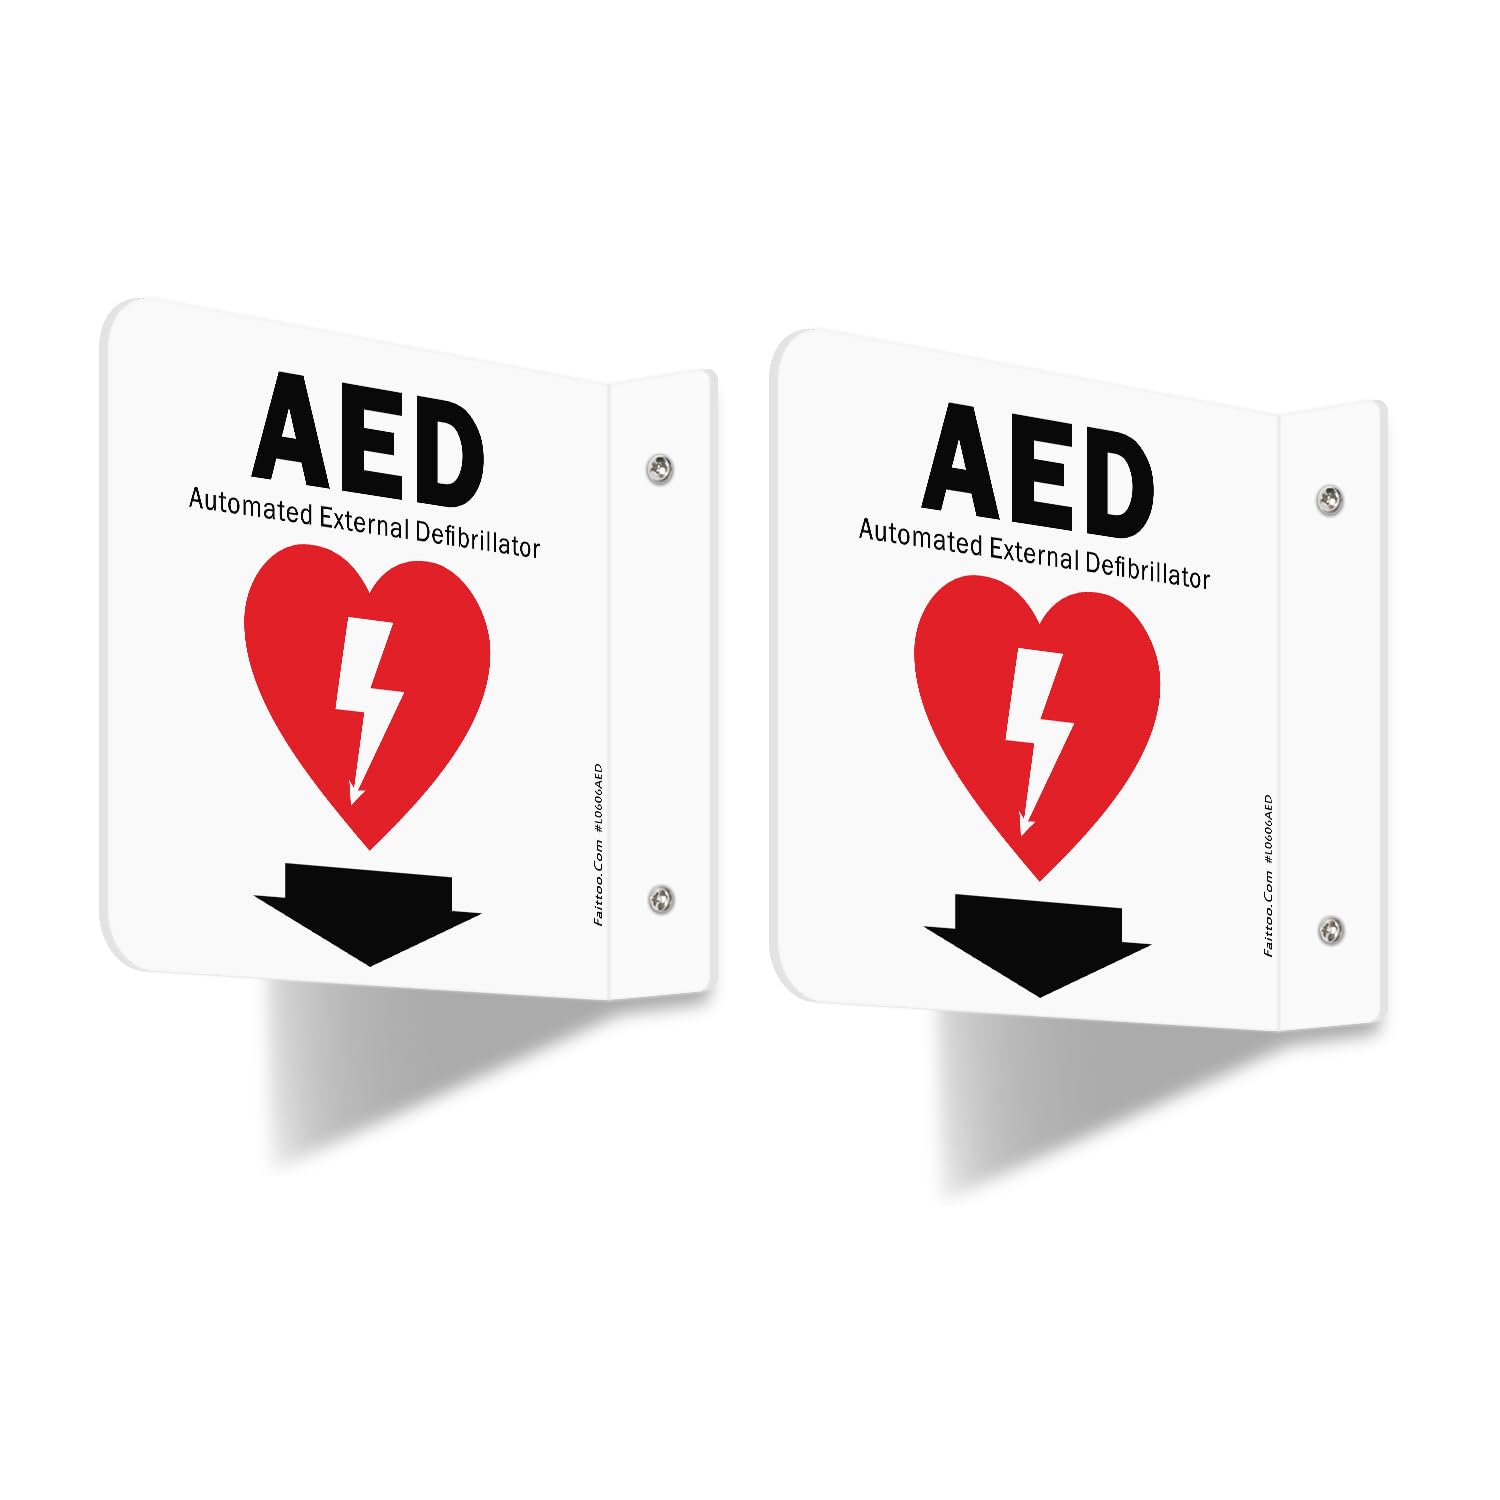 Faittoo AED Sign, AED Automated External Defibrillator with Down Arrow Sign, 6x6 Inches 90D Projection - Acrylic, 2 Pre-Drilled Holes, Includes Matching Screws, Use for Home Office/Business, 2 Pack